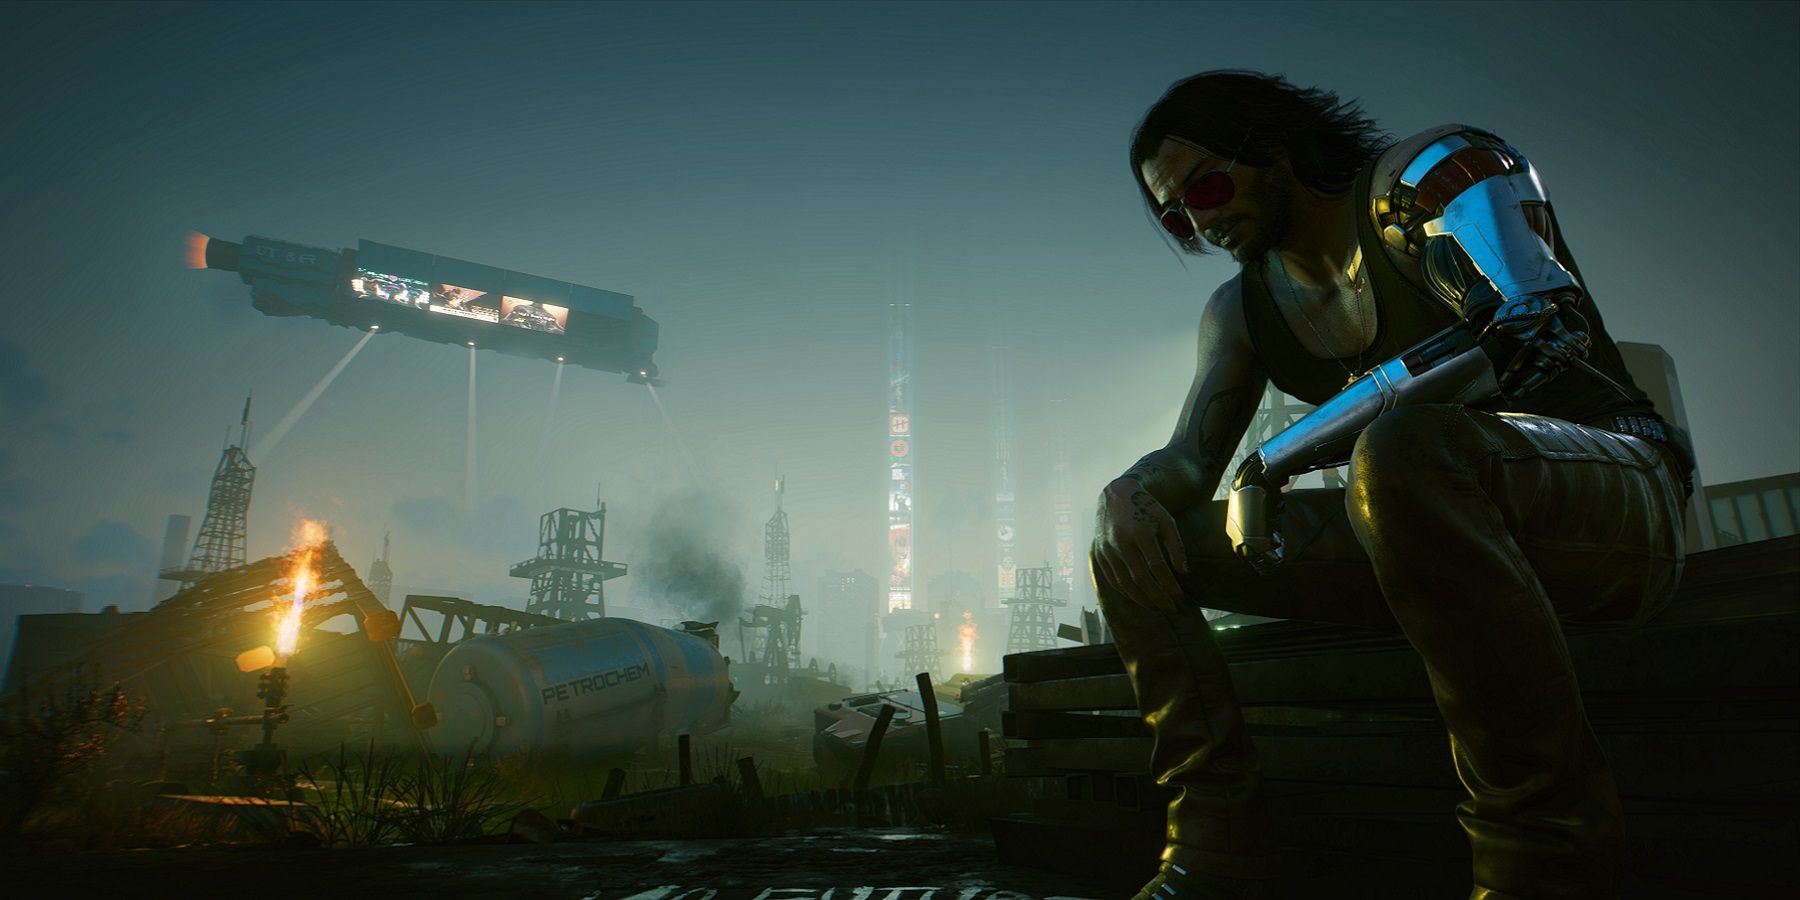 Image from Cyberpunk 2077 showing a forlorn Johnny Silverhands sat down outside.